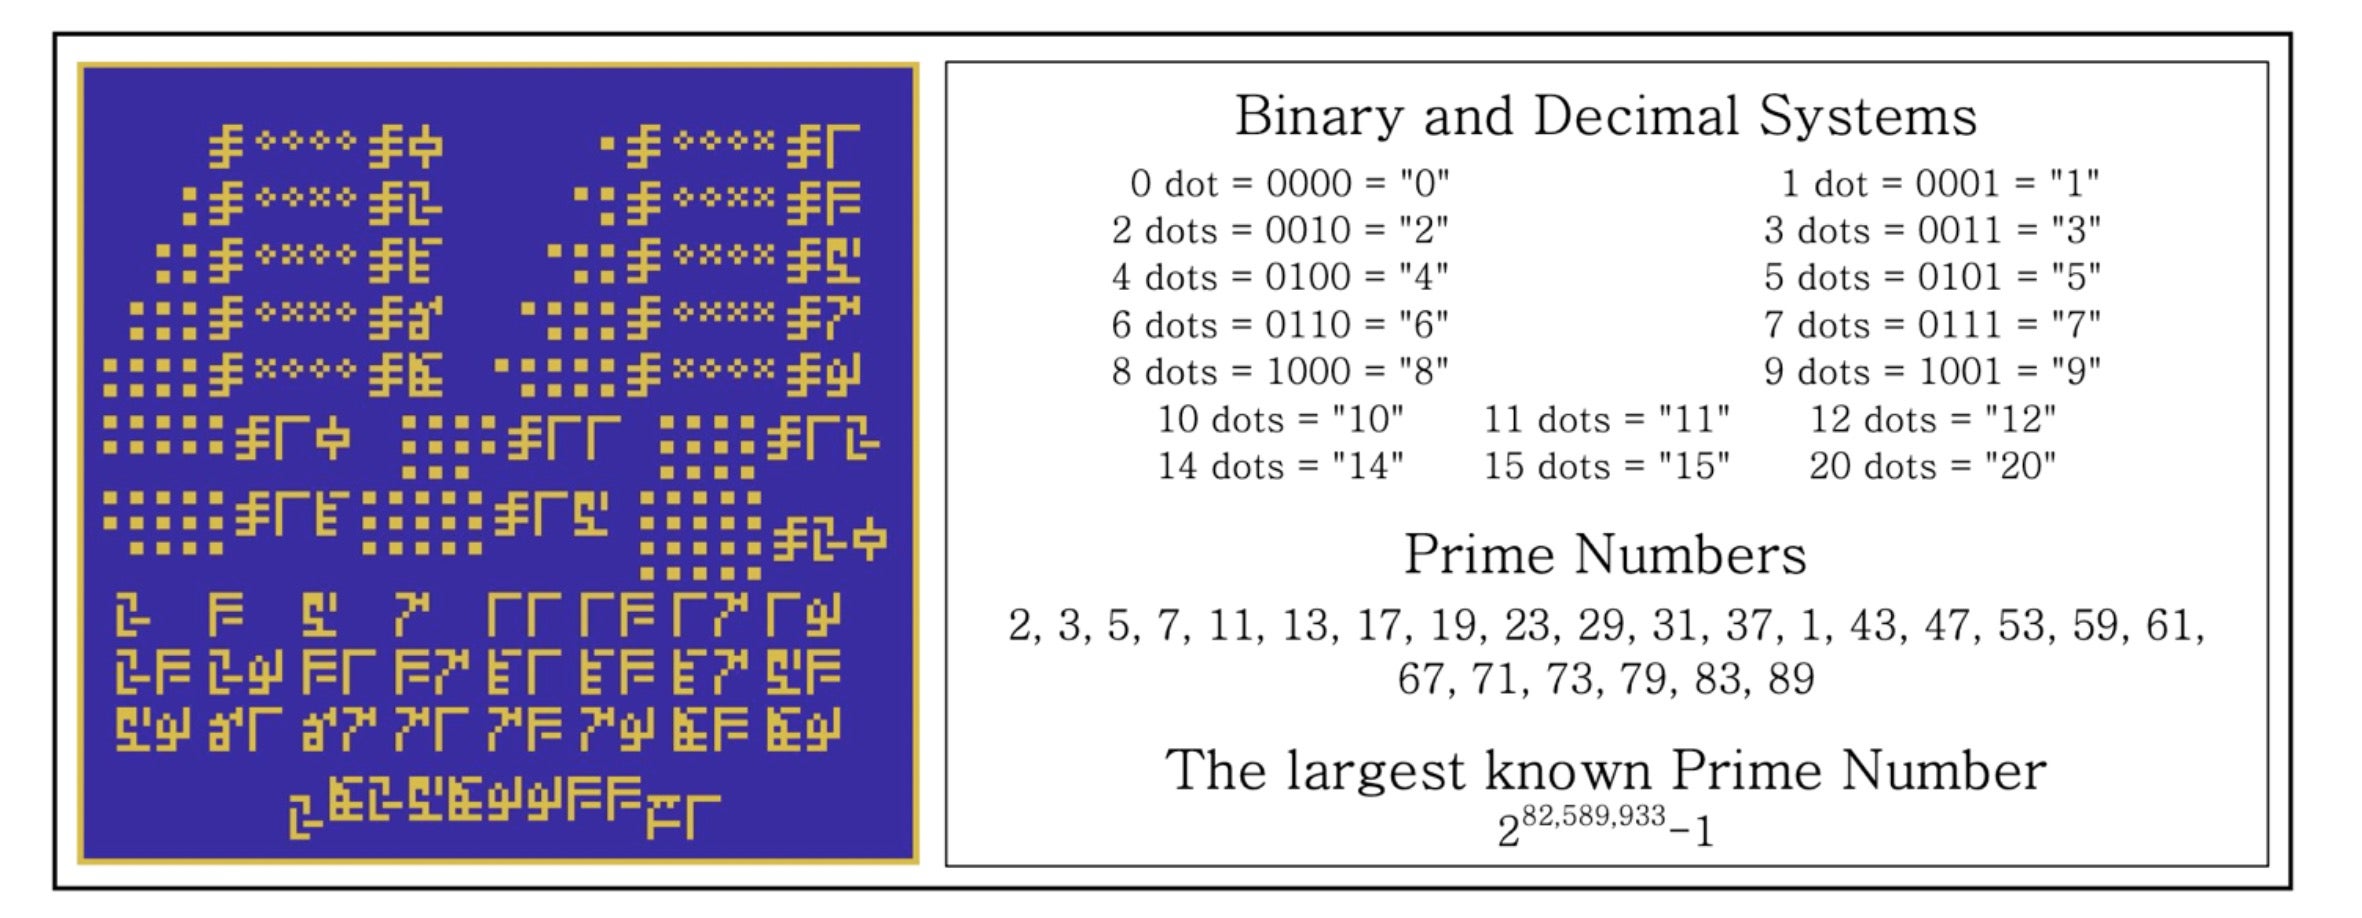 Binary and decimal systems.